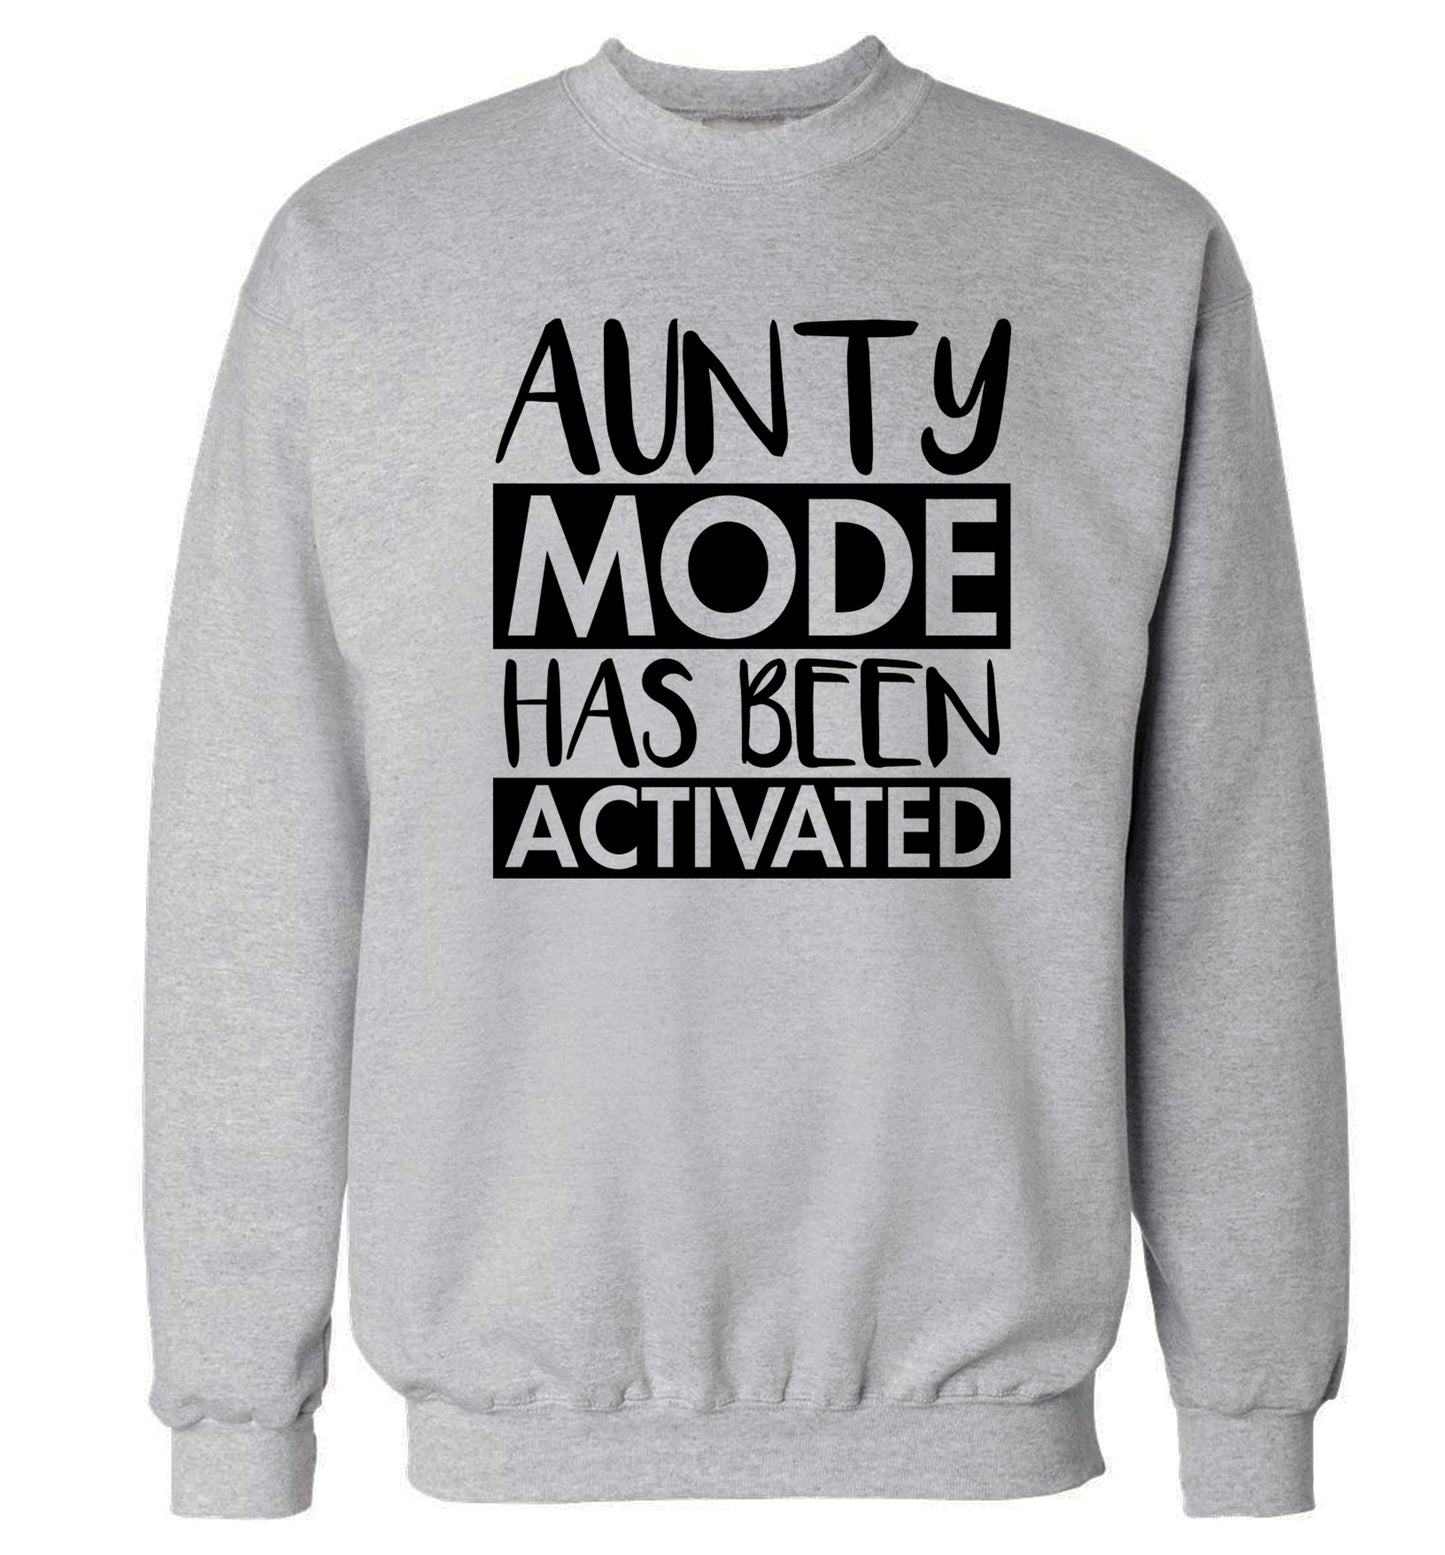 Aunty mode activated Adult's unisex grey Sweater 2XL